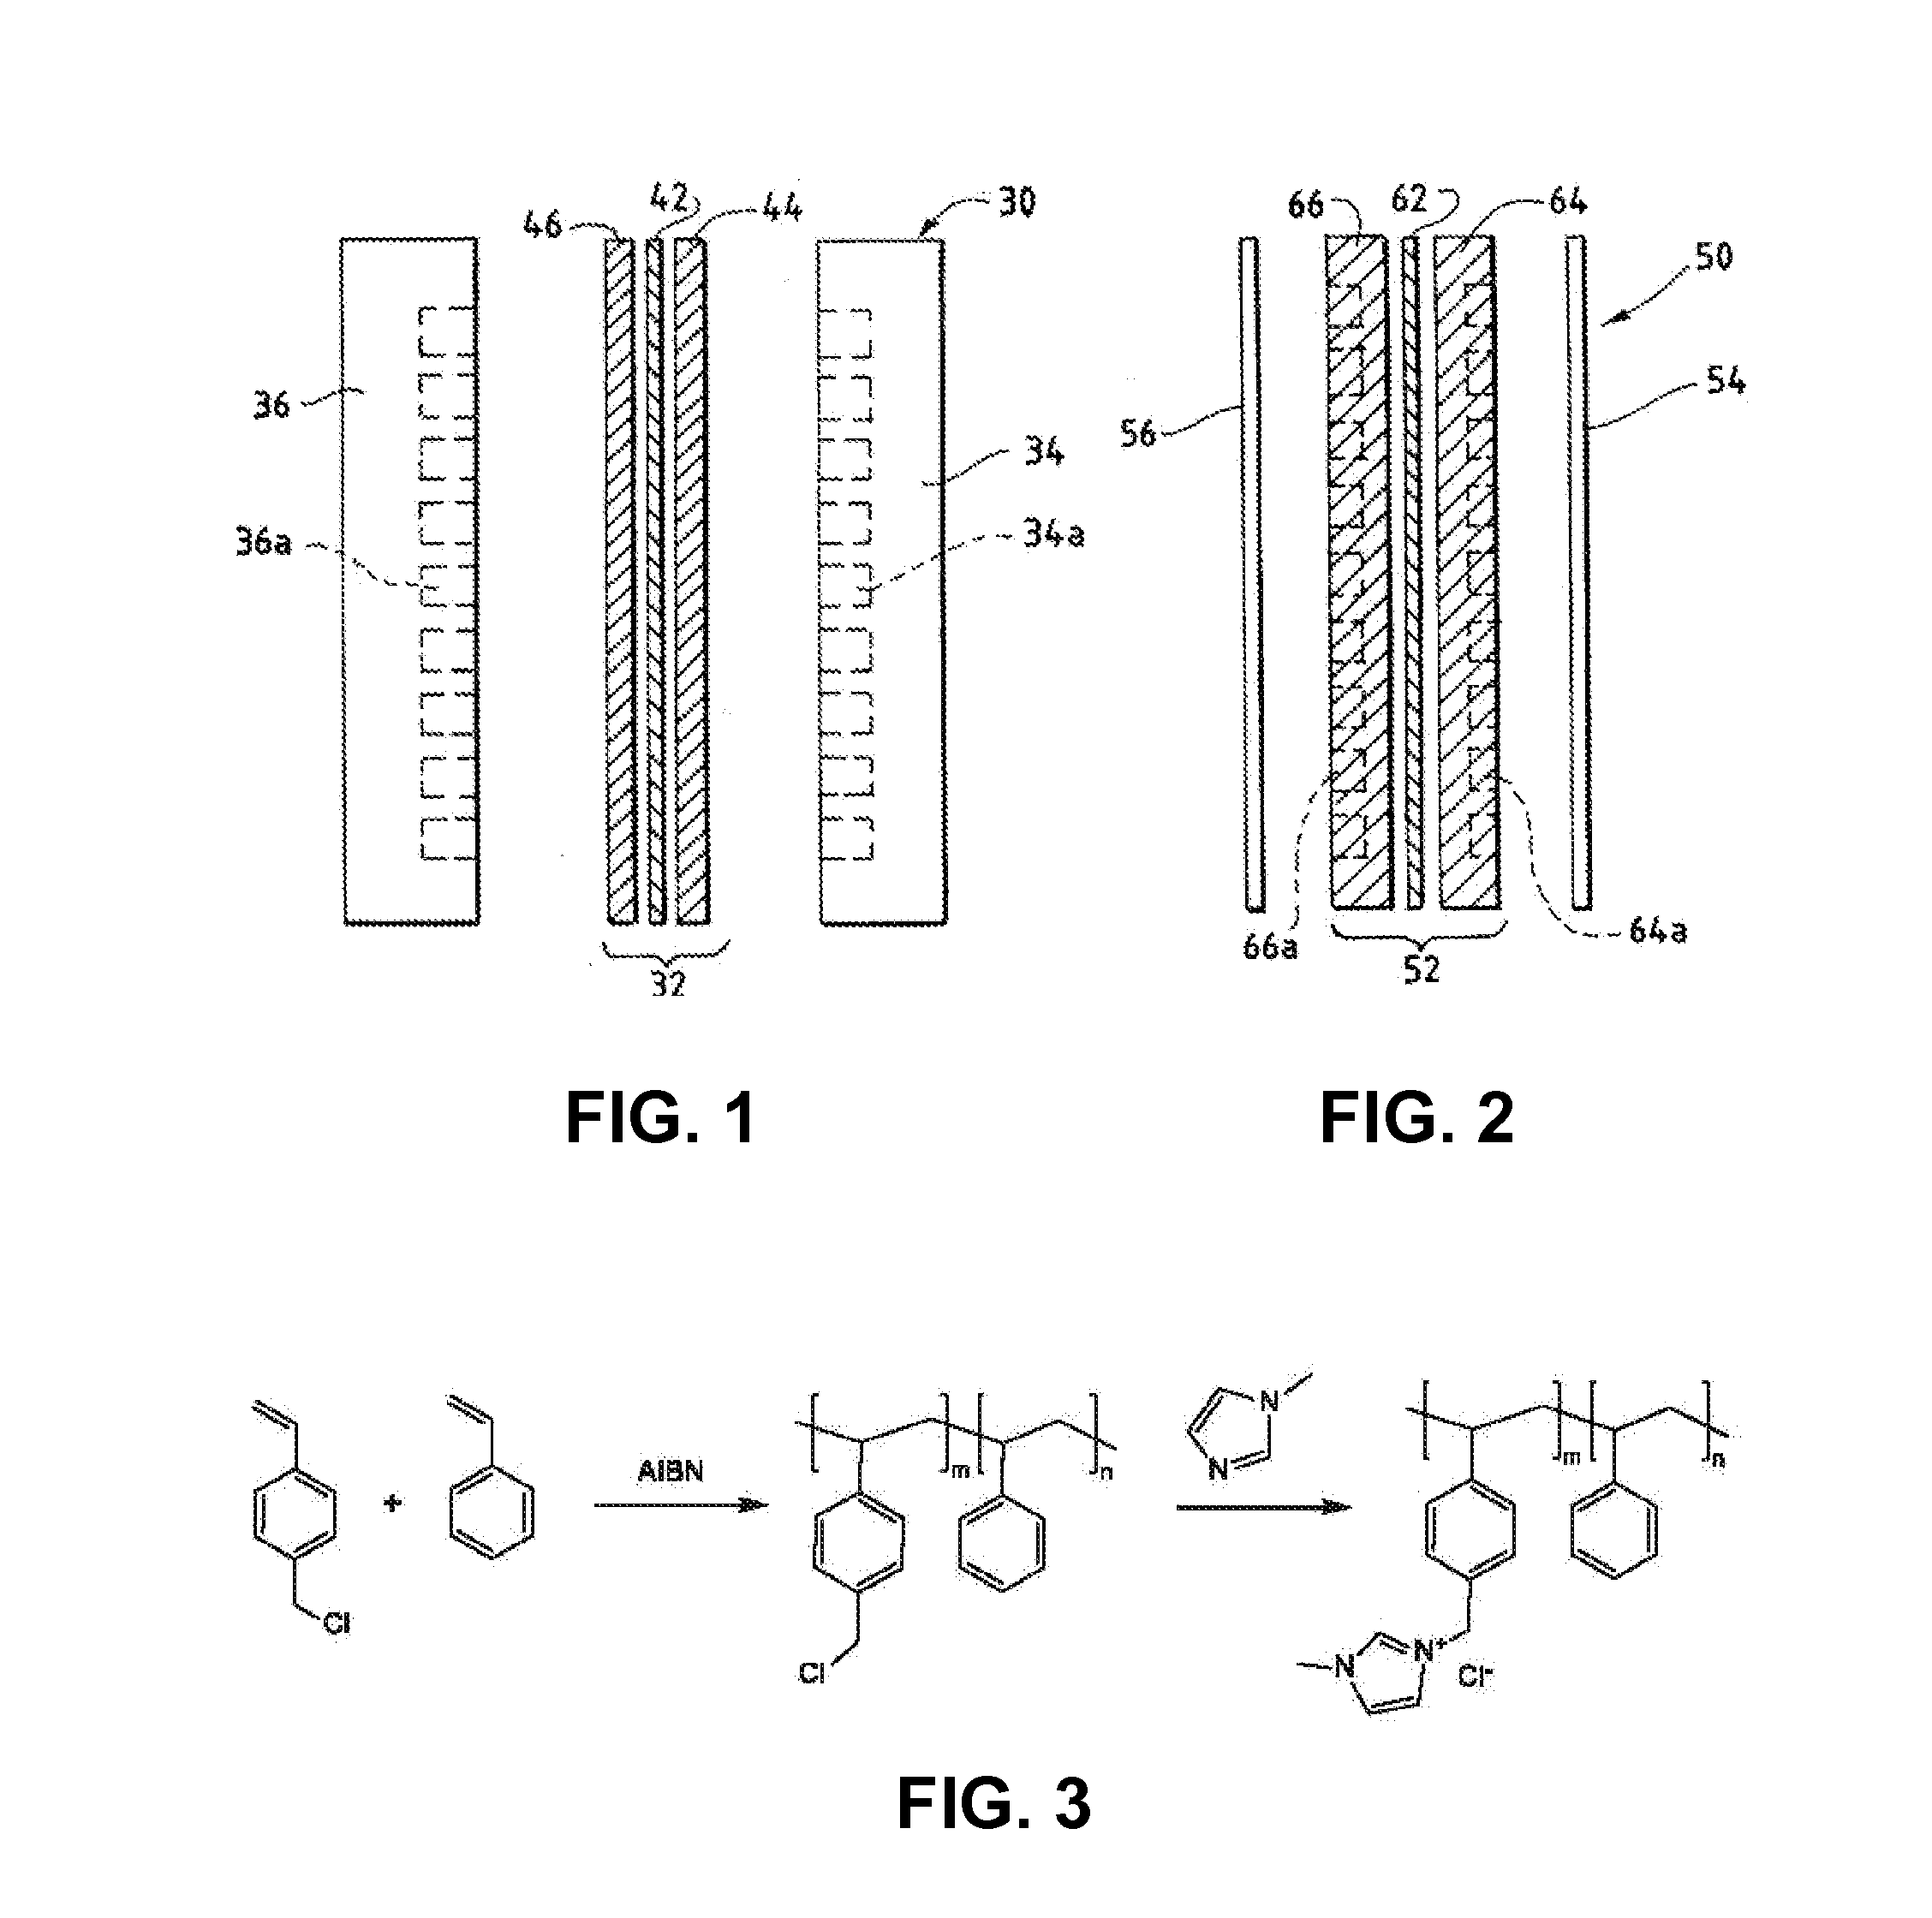 Electrochemical Device For Converting Carbon Dioxide To A Reaction Product